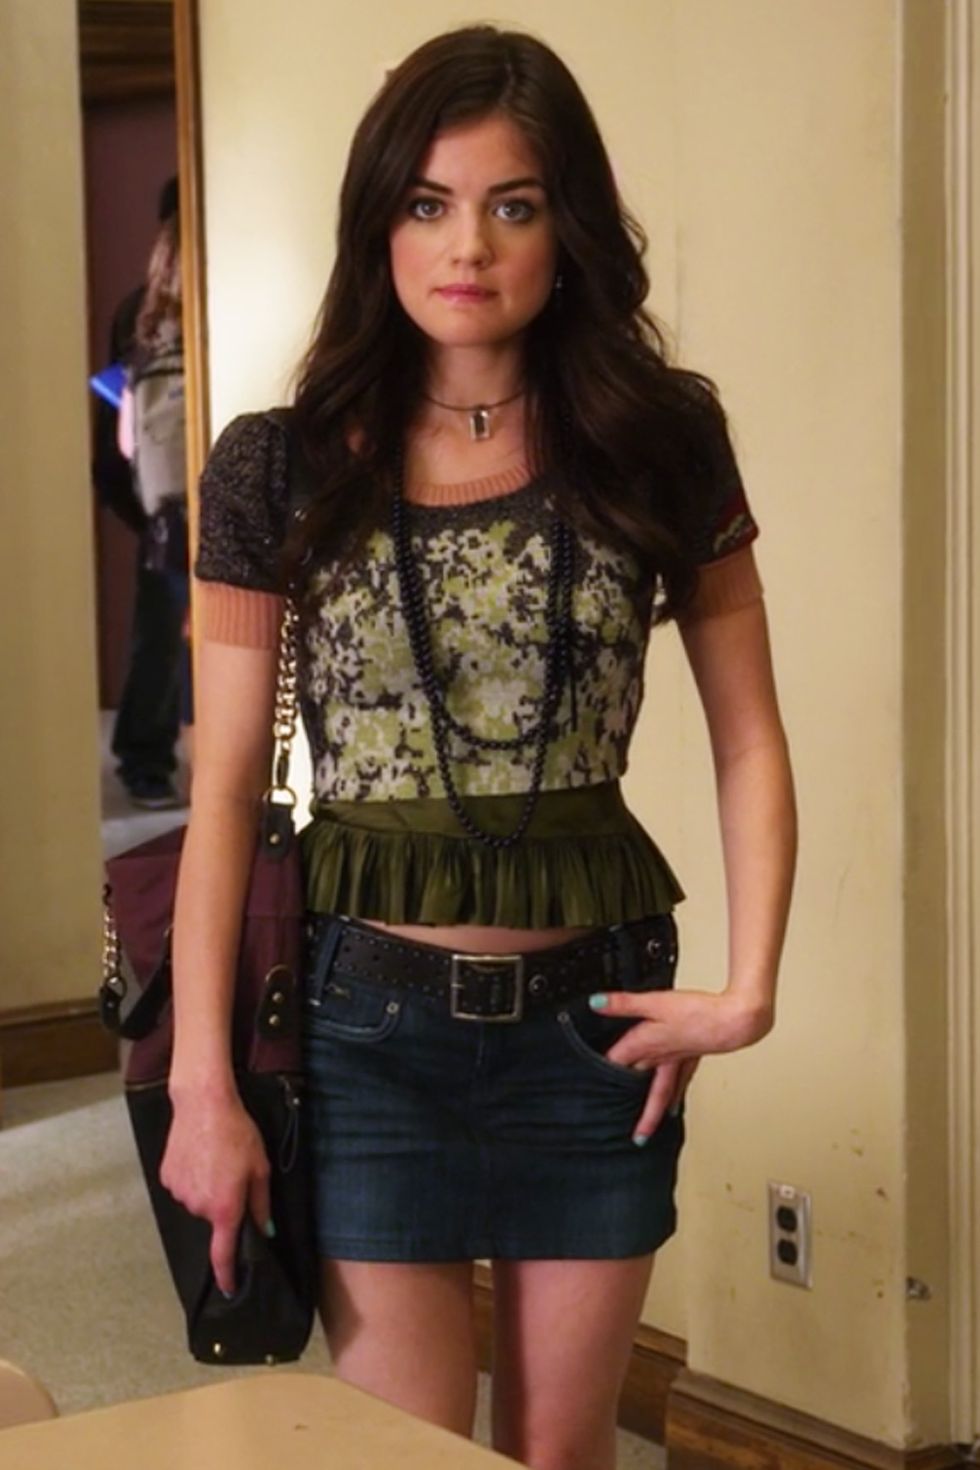 If having a closet full of Aria's is wrong, then we don't want to